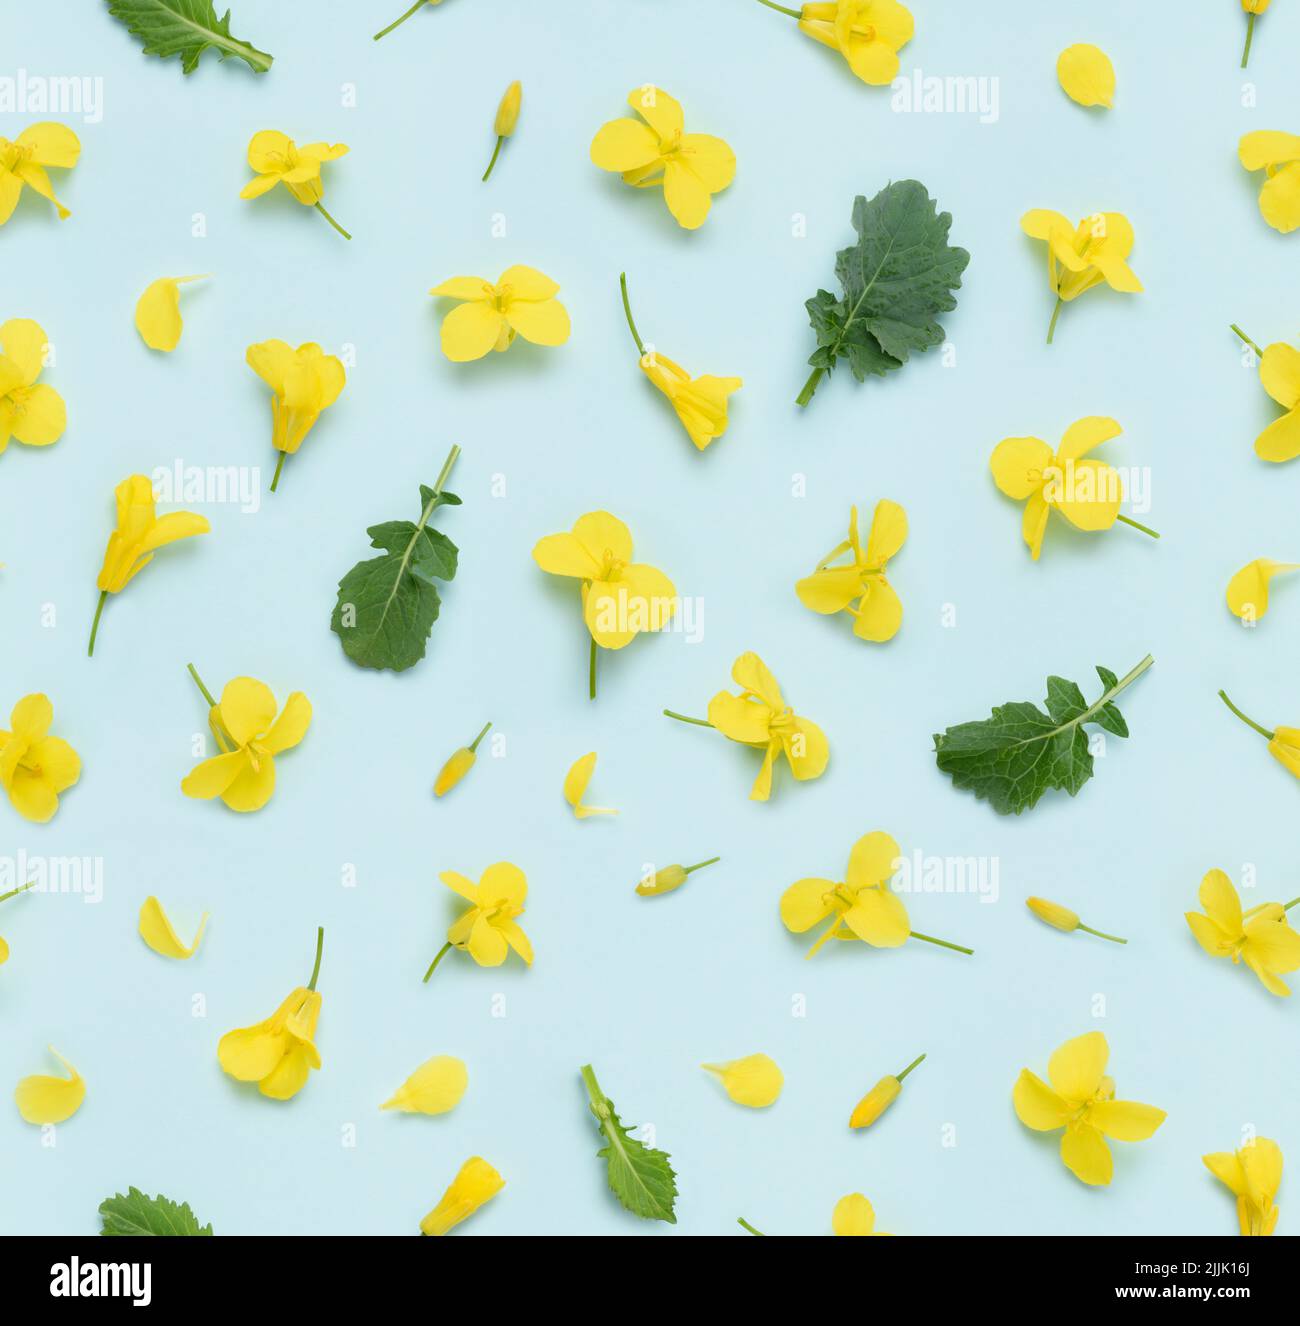 Rapeseed canola yellow blooming flowers leaves buds and petals seamless floral pattern background, top view flat lay Stock Photo